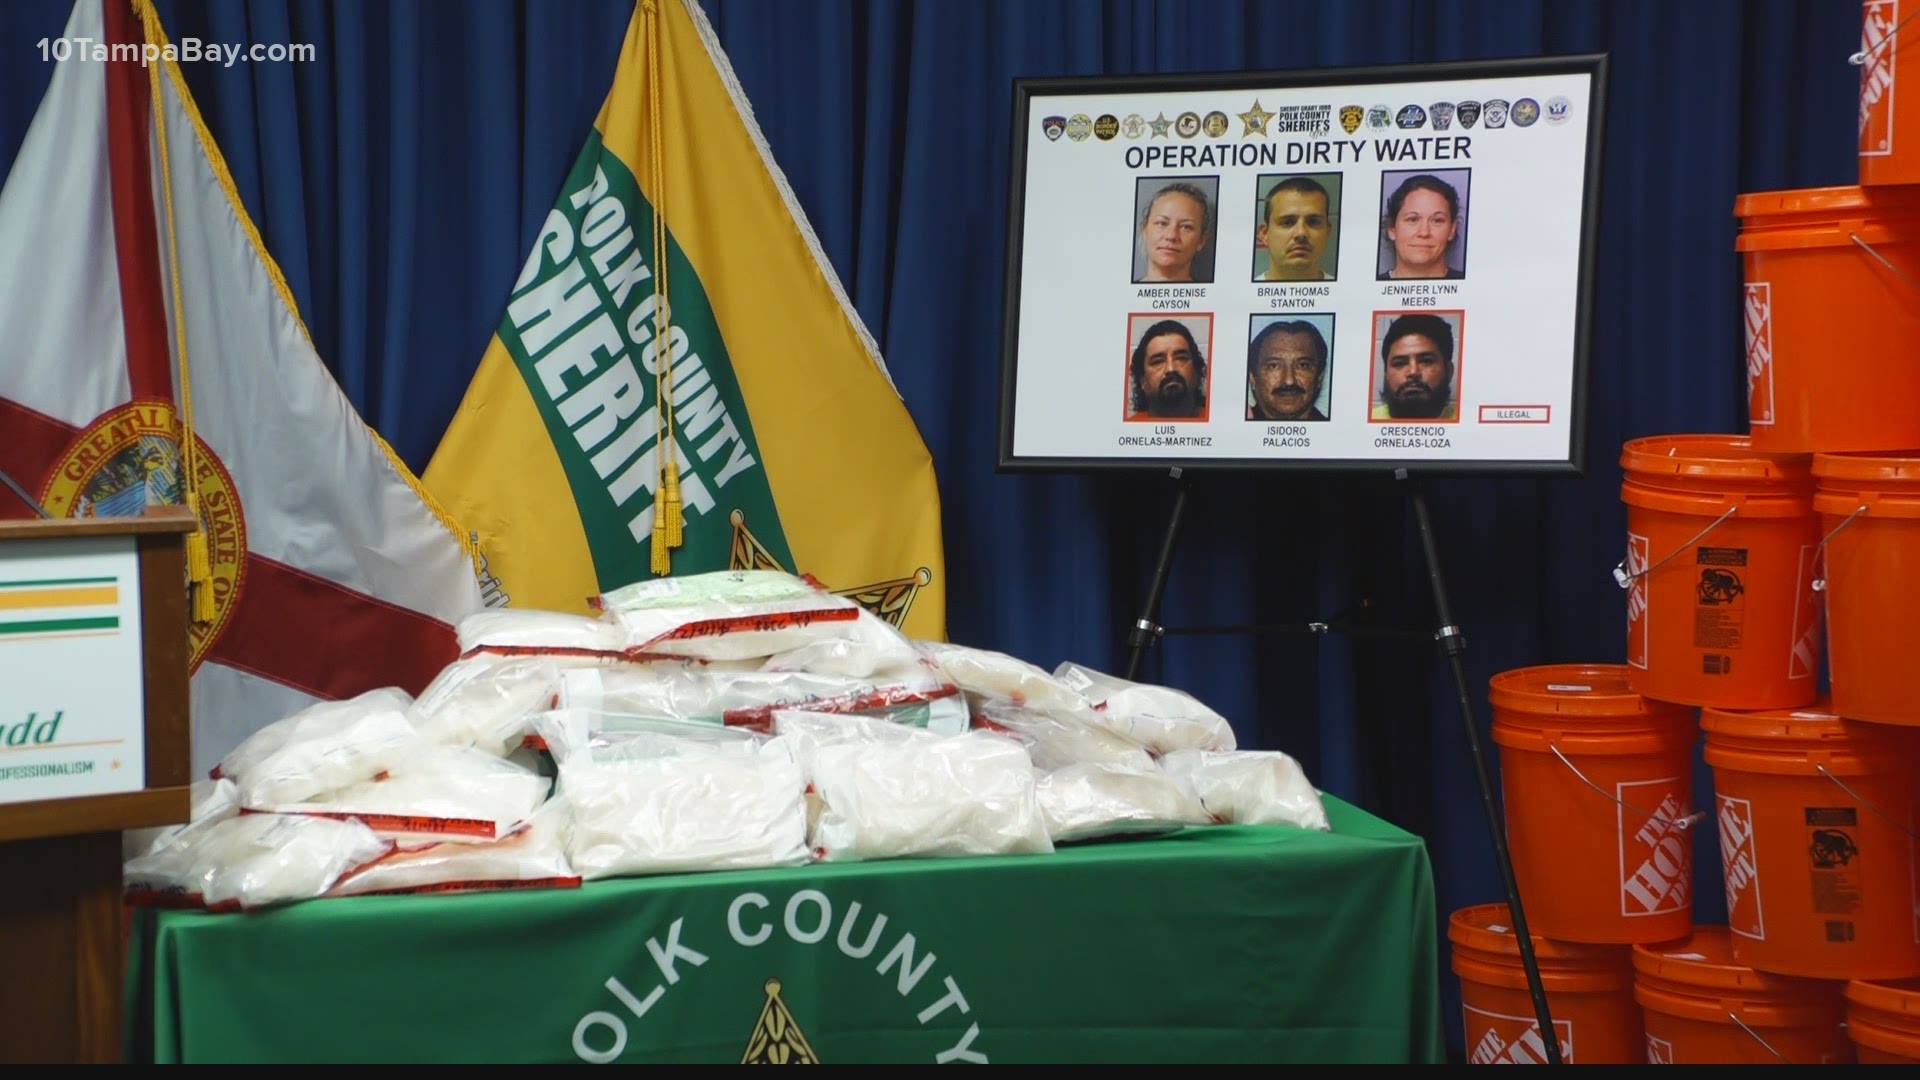 Polk County Sheriff Grady Judd says the trafficking of drugs was masterminded by a man behind bars.